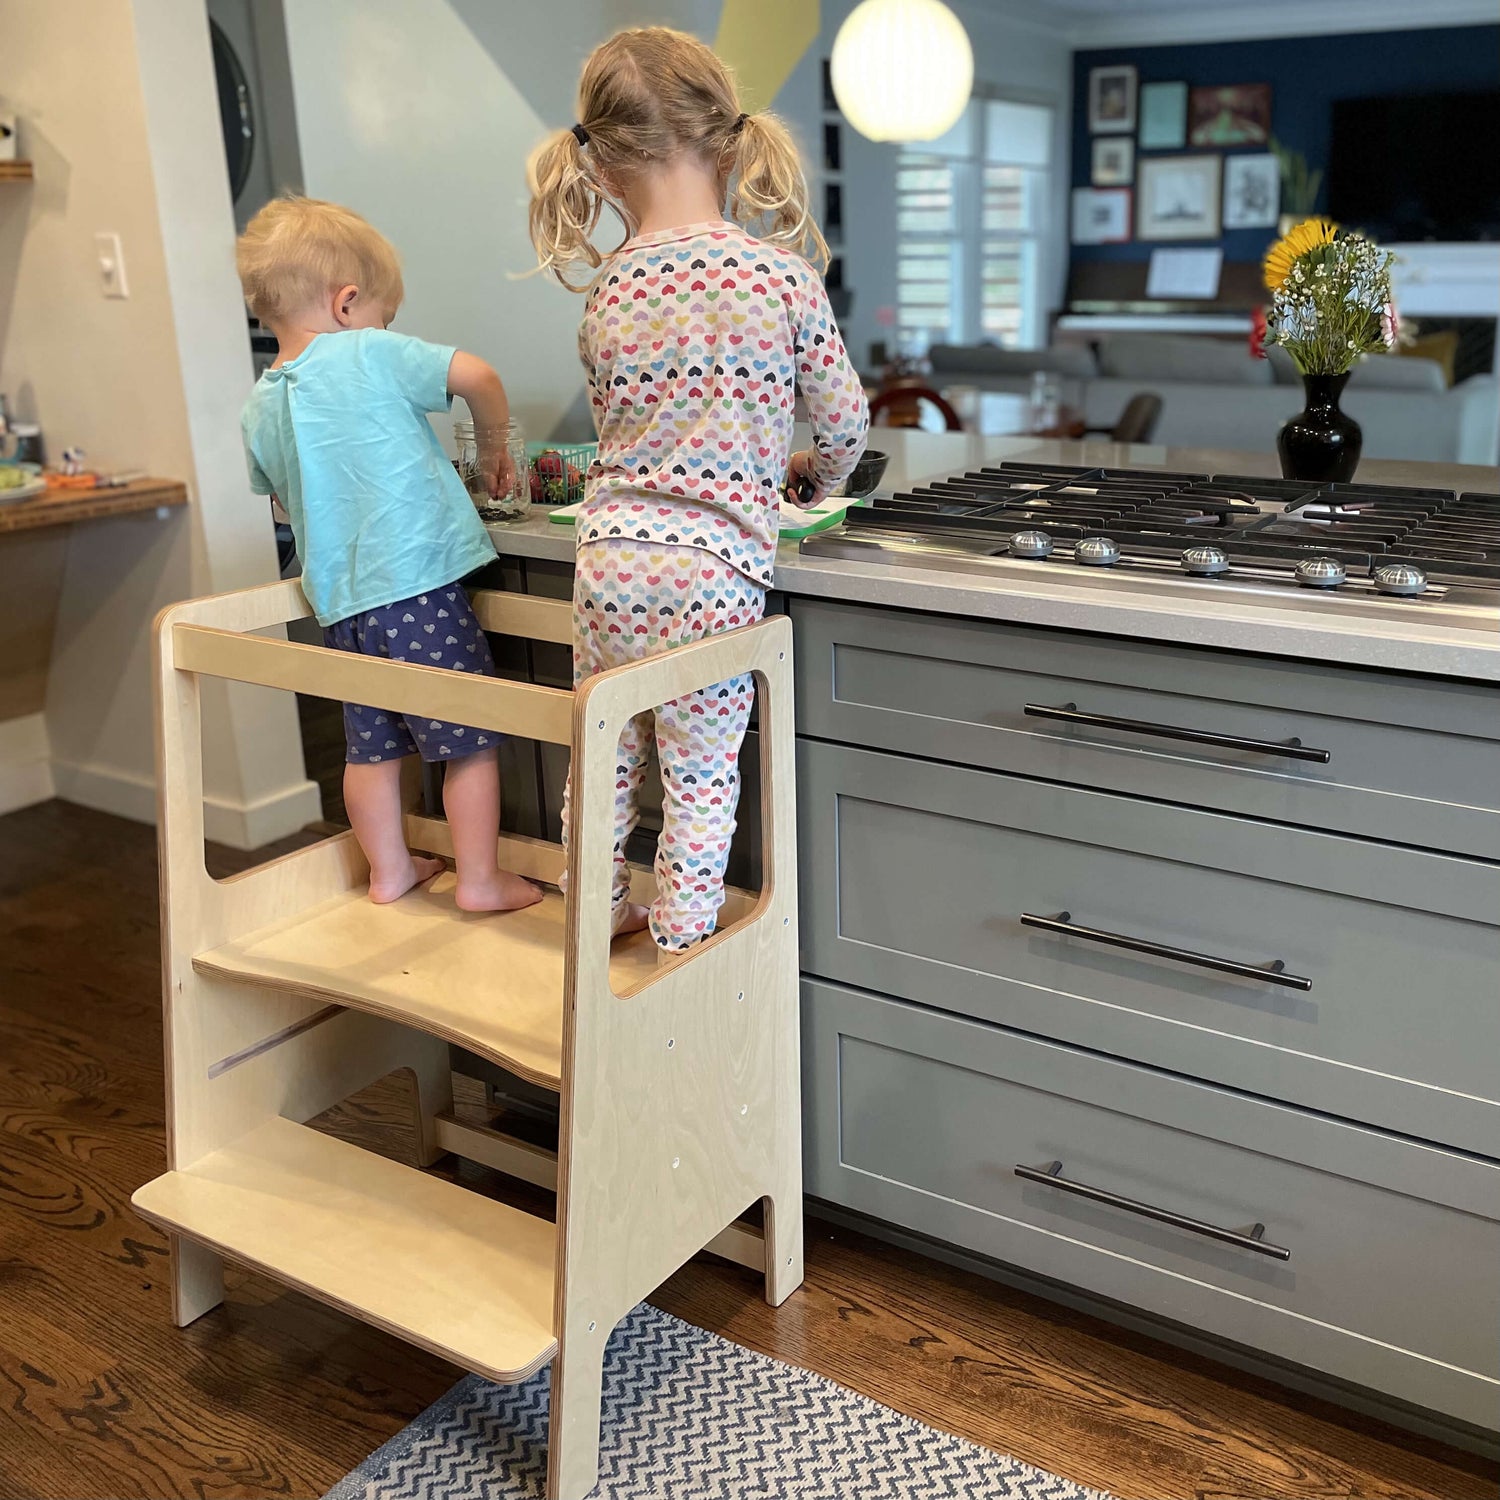 Toddler learning tower makes kitchen skills for children more fun